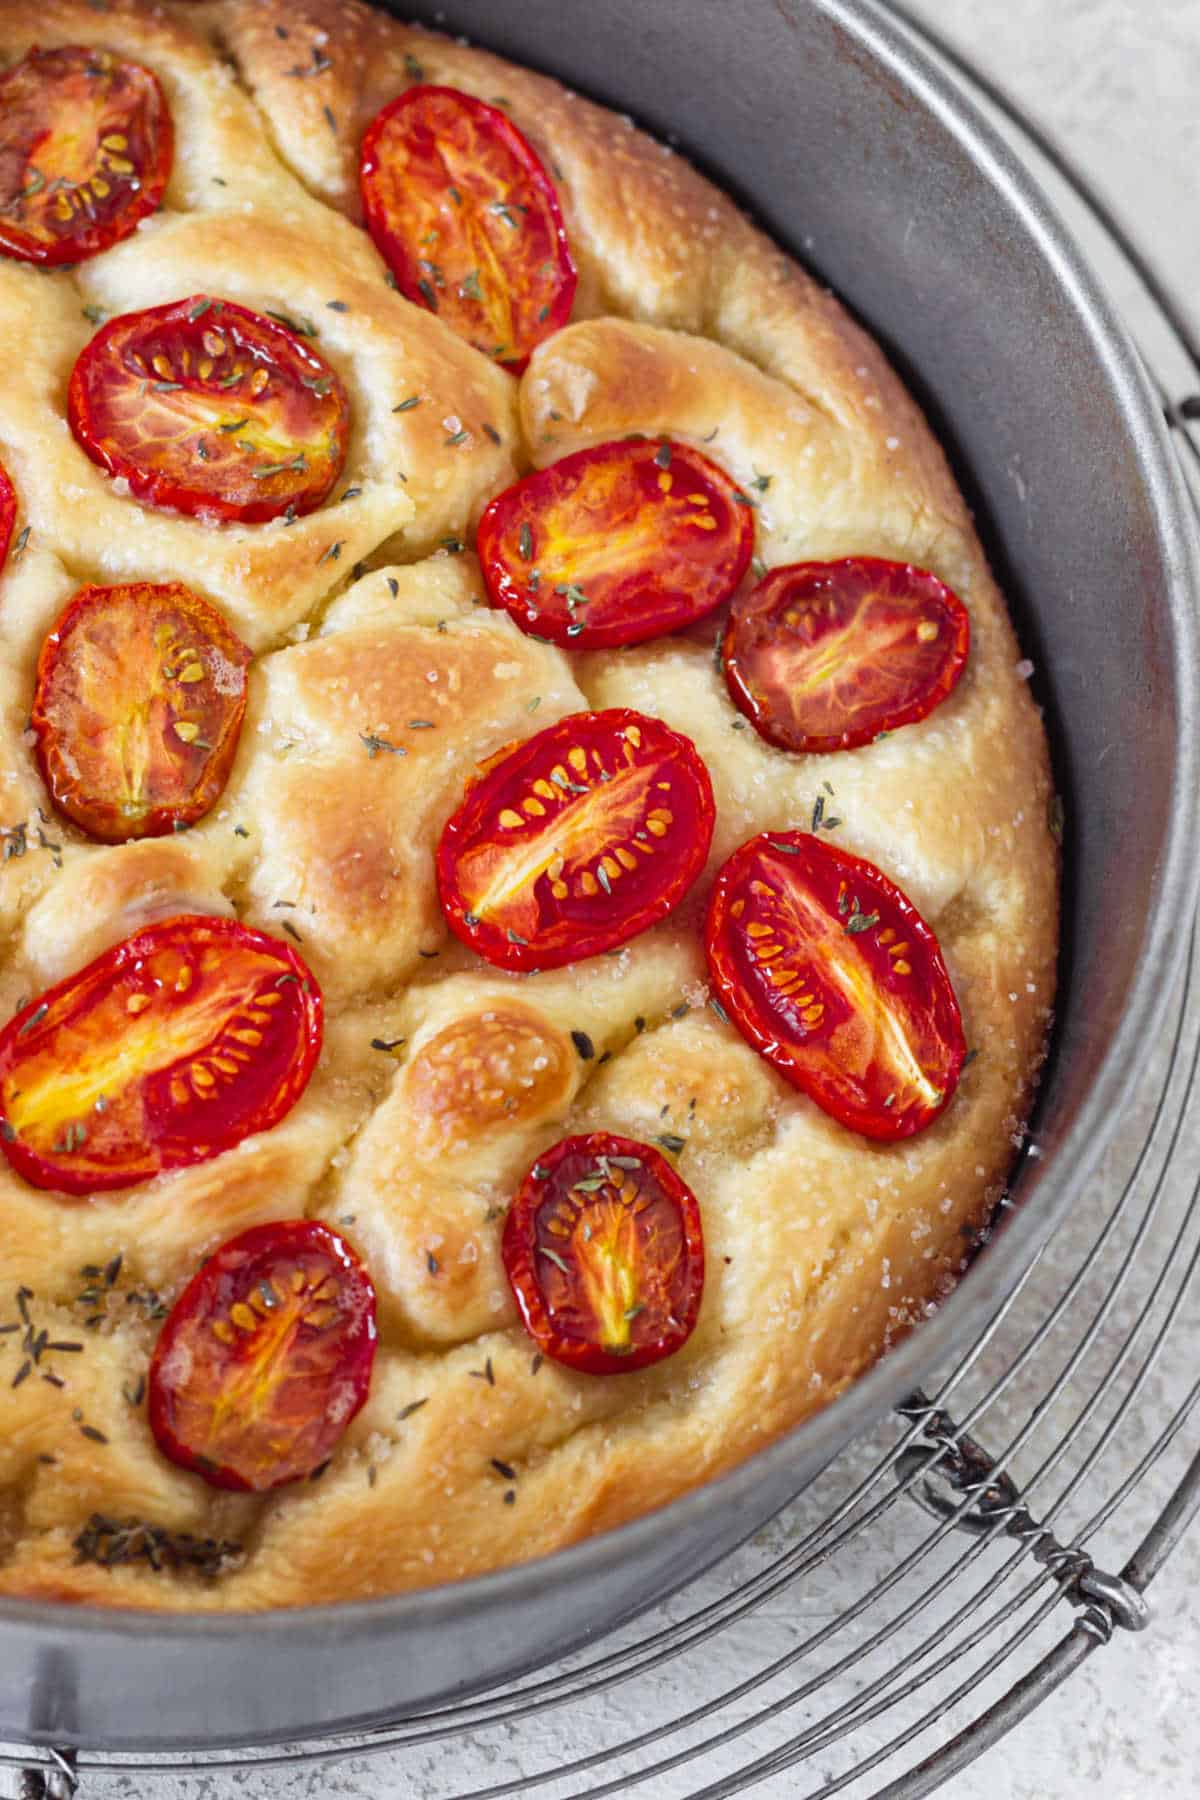 Partial view of baked tomato focaccia in metal pan on wire rack